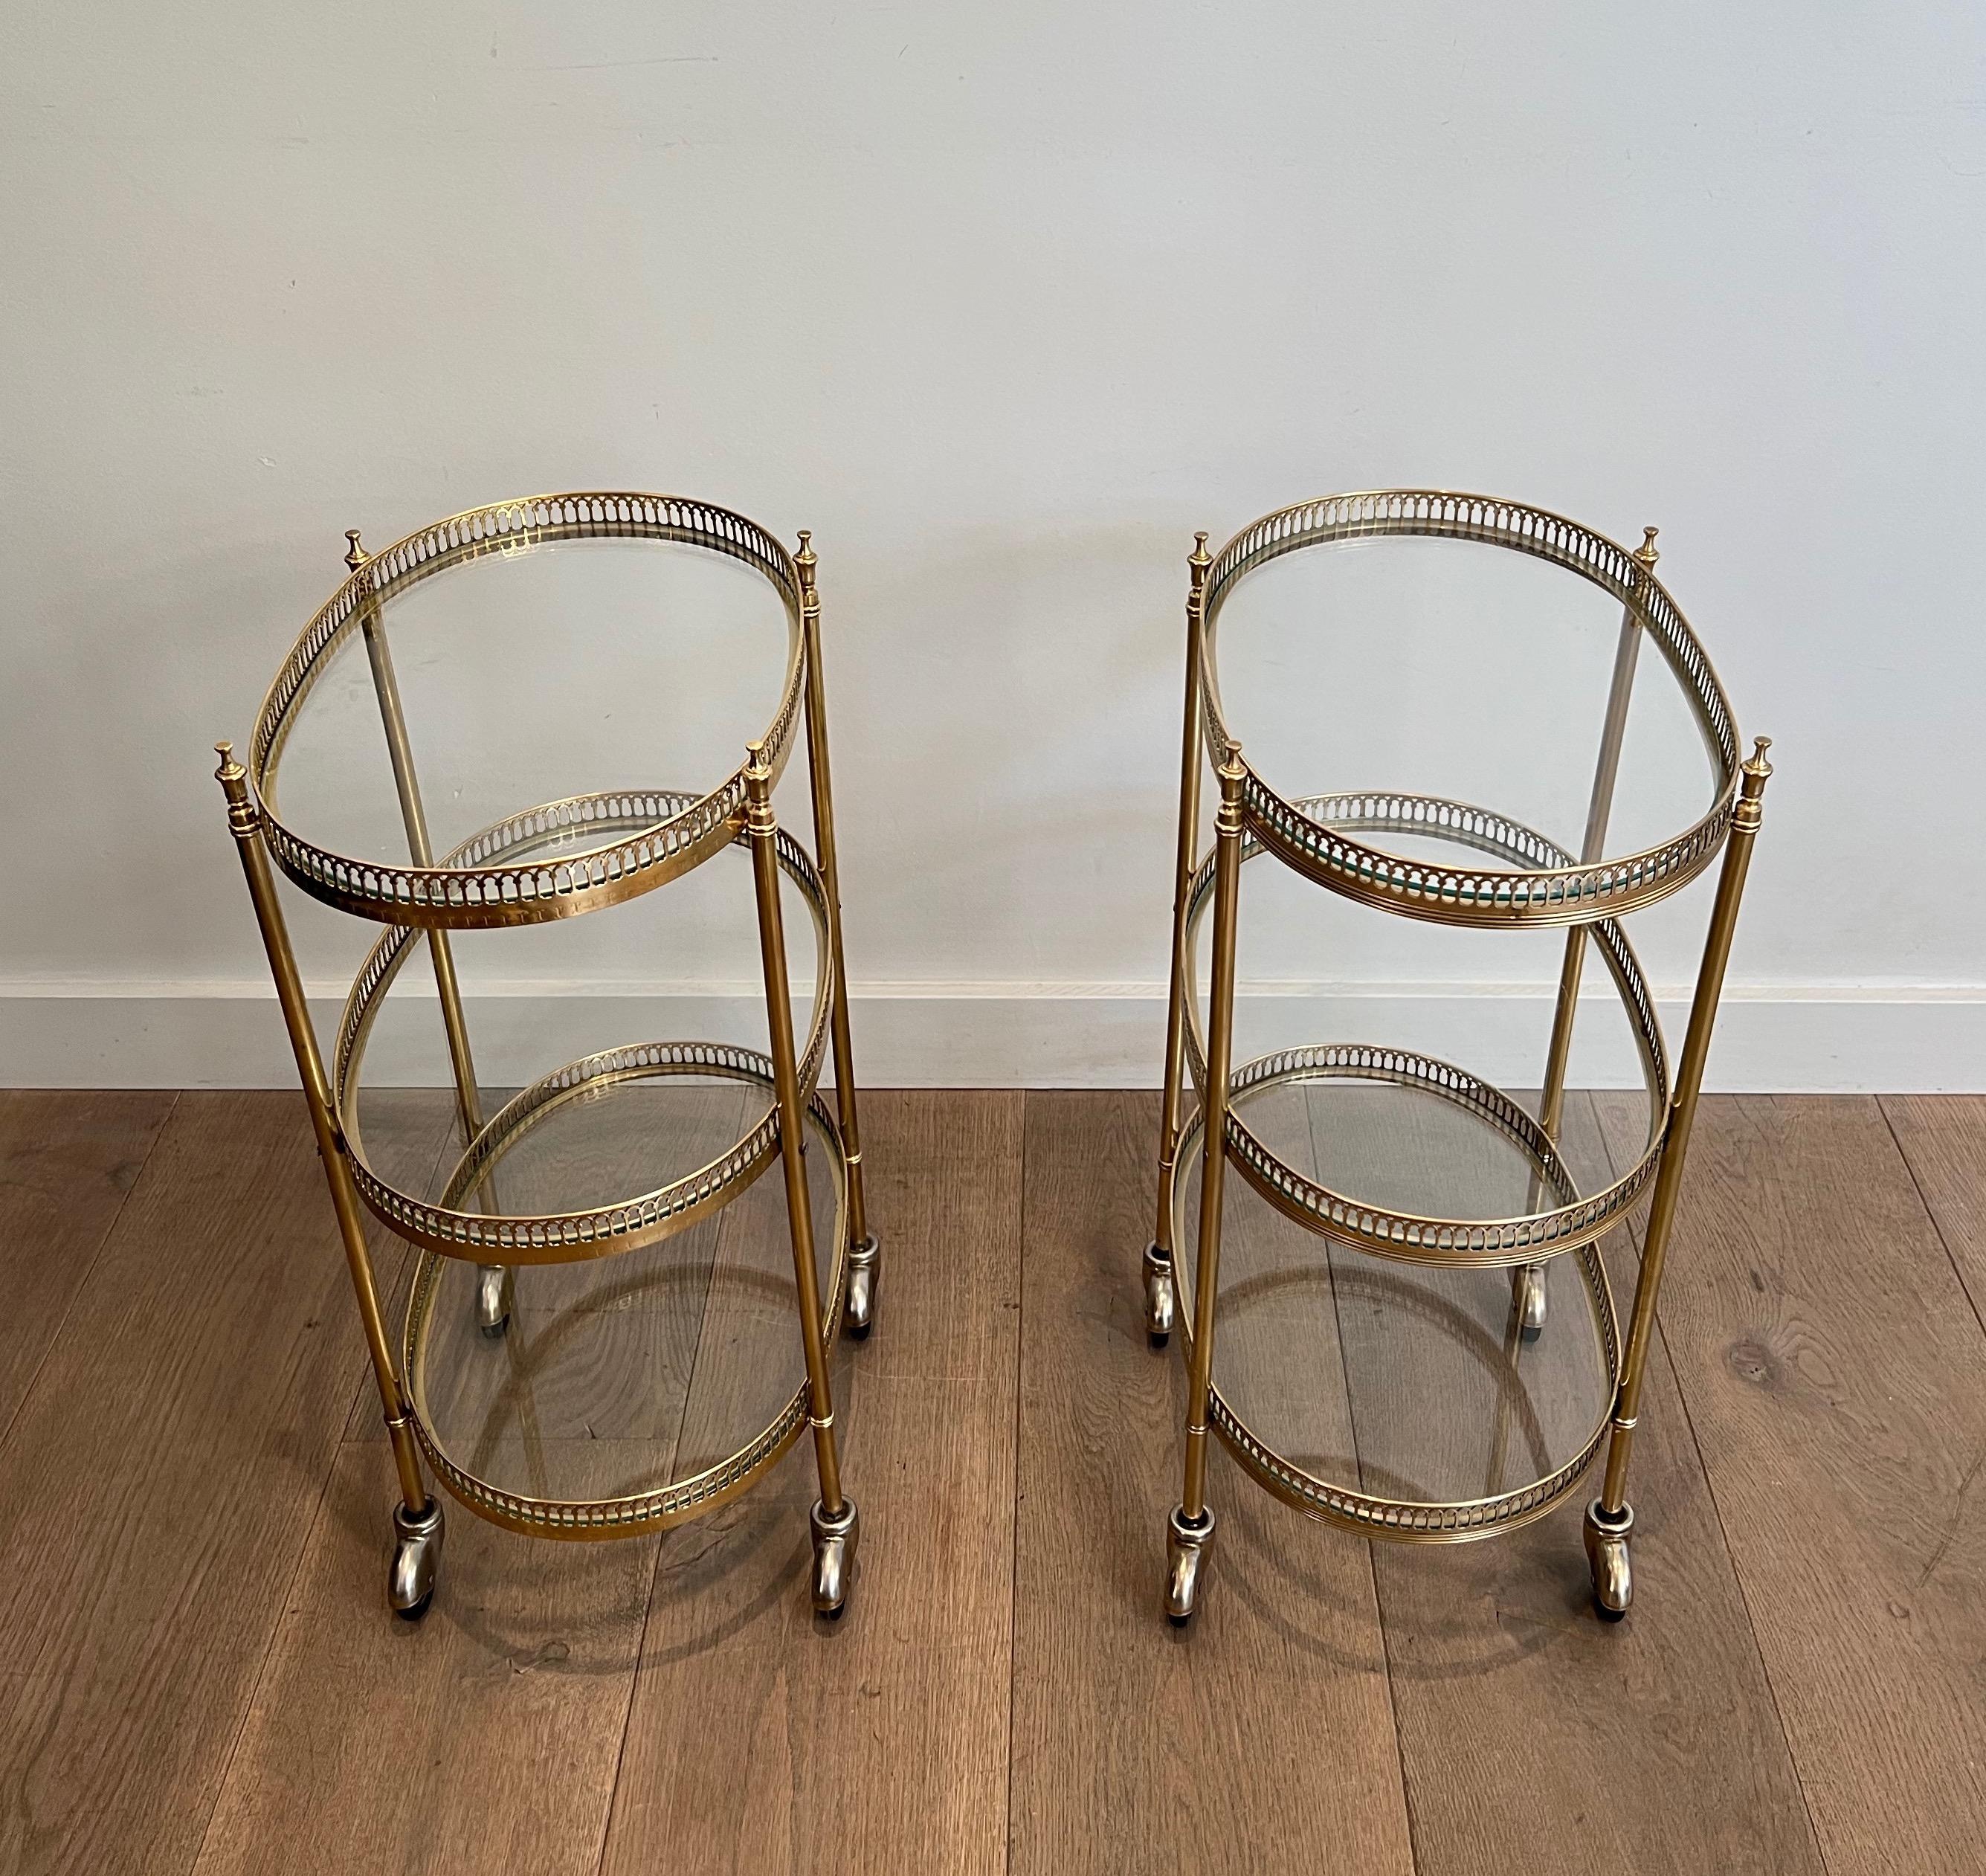 Pair of 3 Tiers Oval Brass Drinks Trolley in the Style of Maison Jansen 1